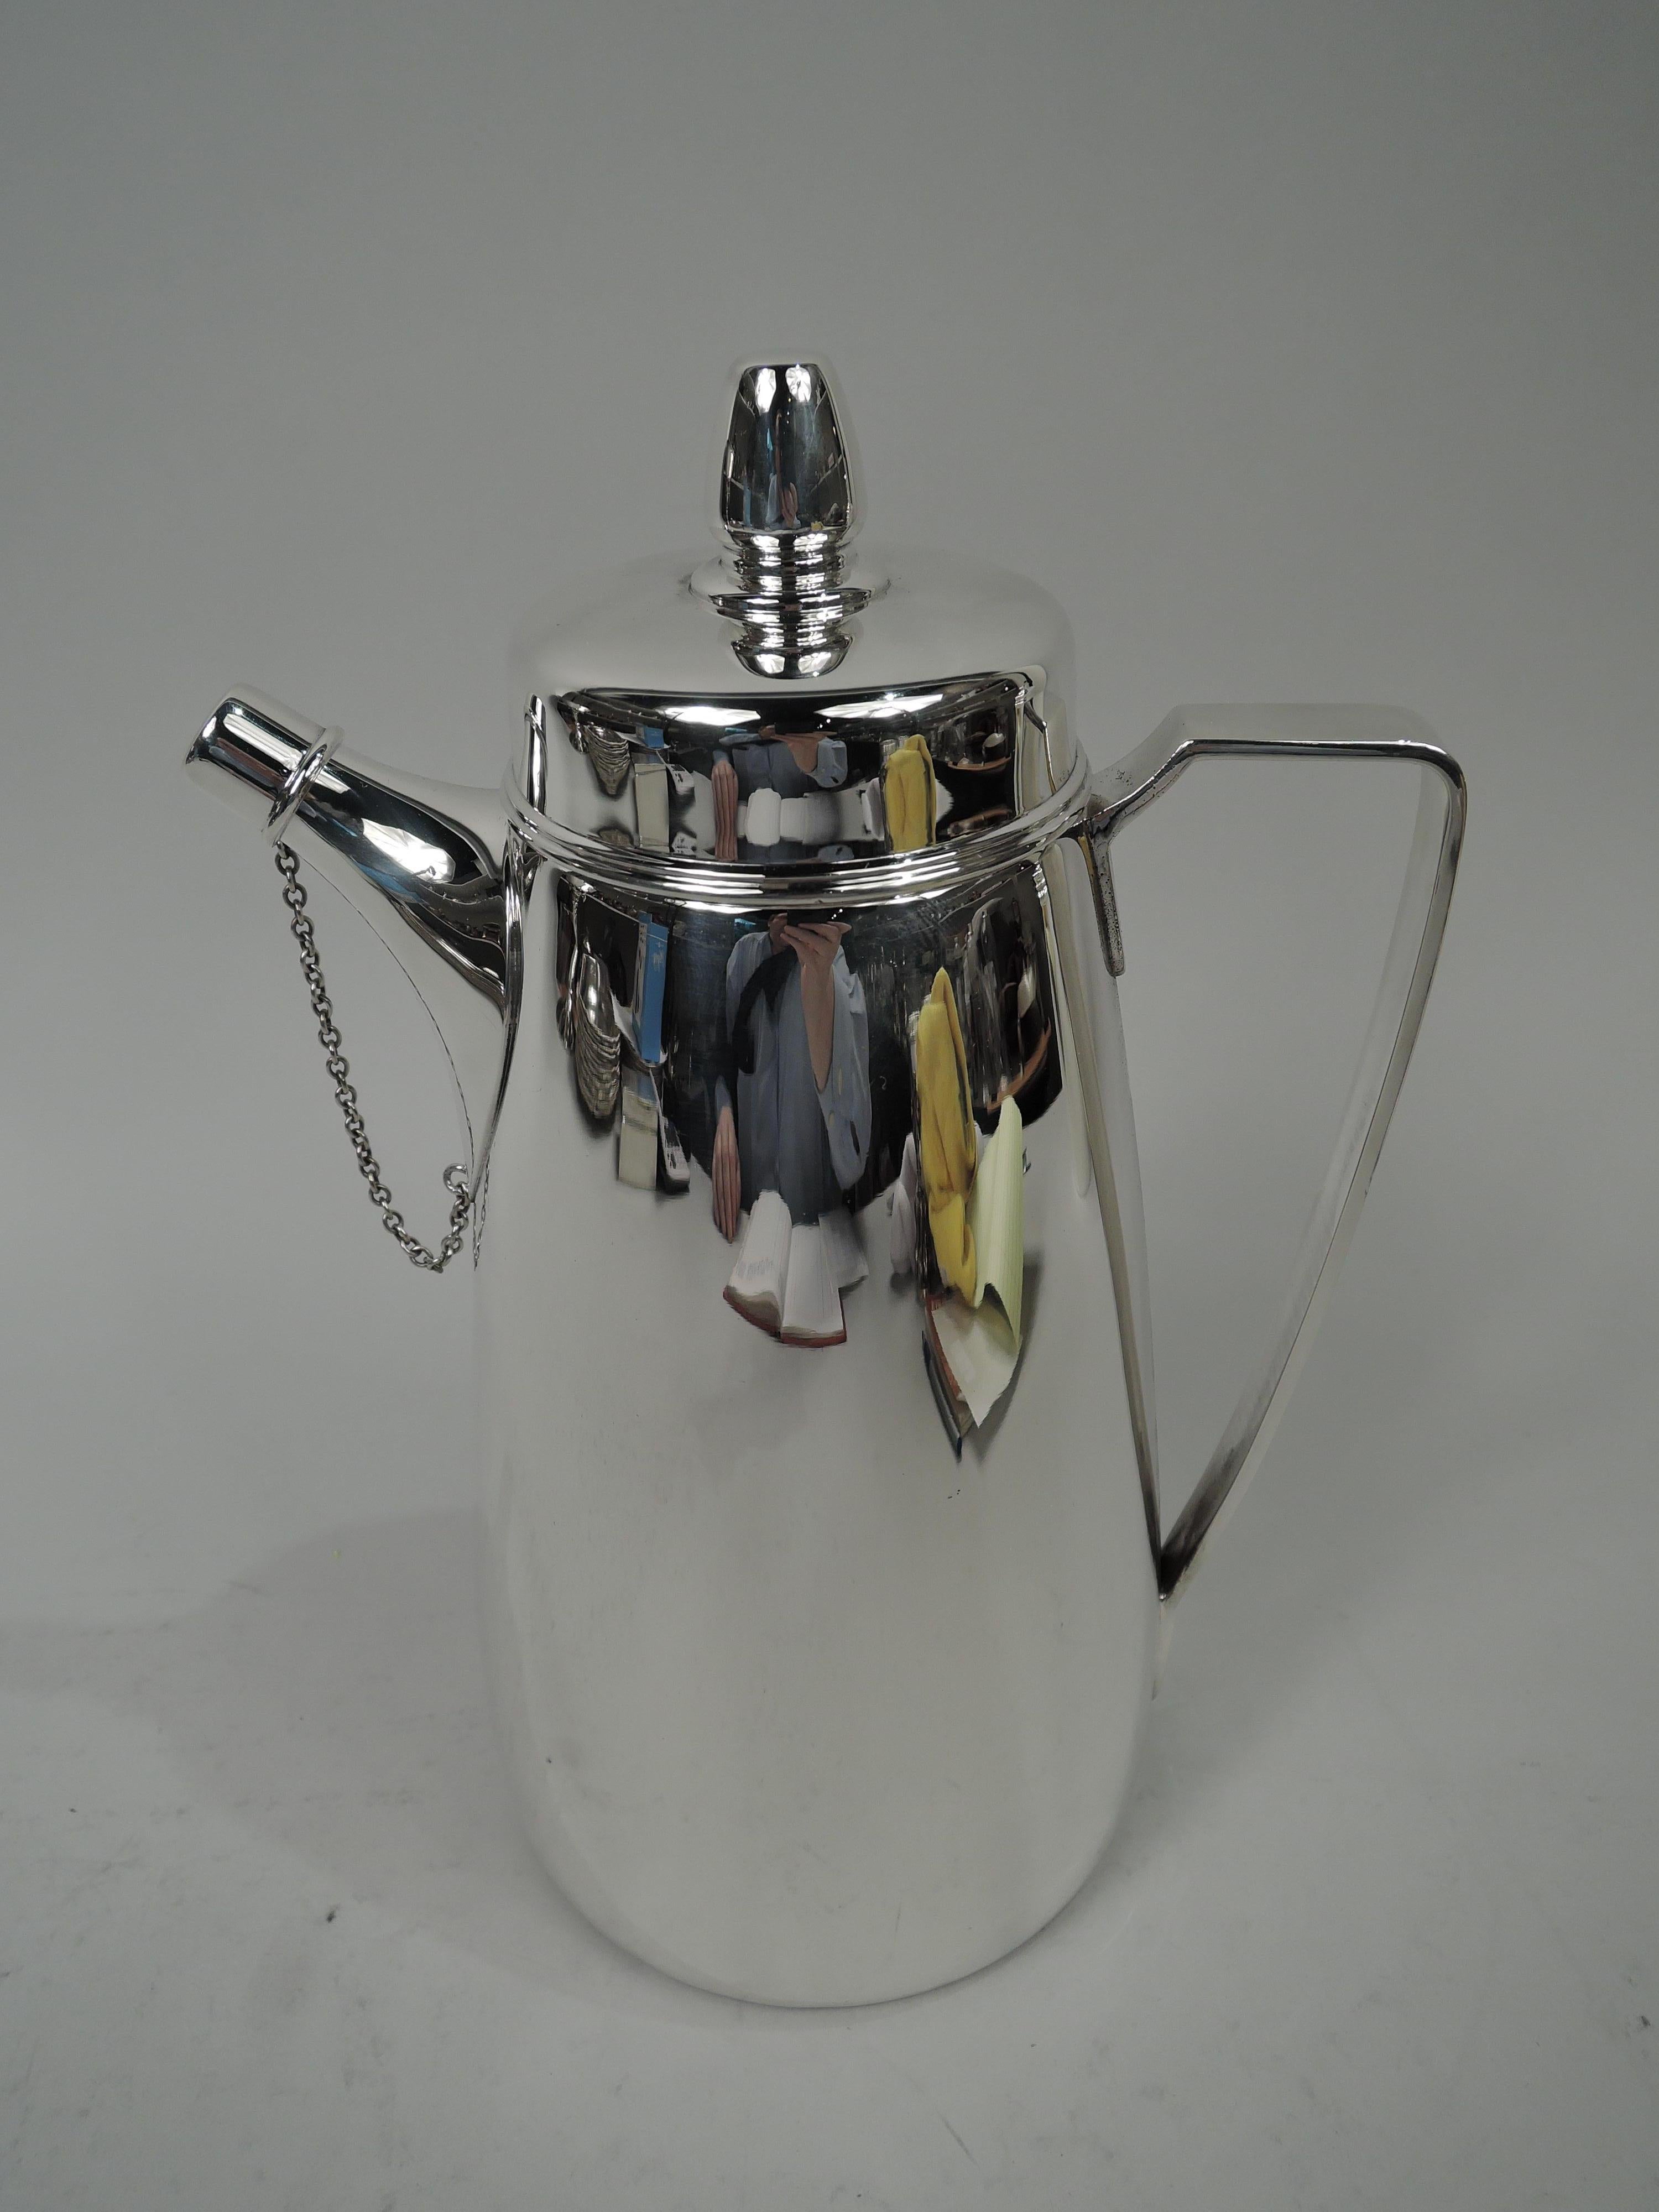 Super snazzy sterling silver cocktail shaker. Made by Tiffany & Co. in New York, ca 1929. Gently curved and upward tapering sides and flat cover with same-form finial. Bracket handle. Stubby spout with chained cap. Built-in strainer. A late